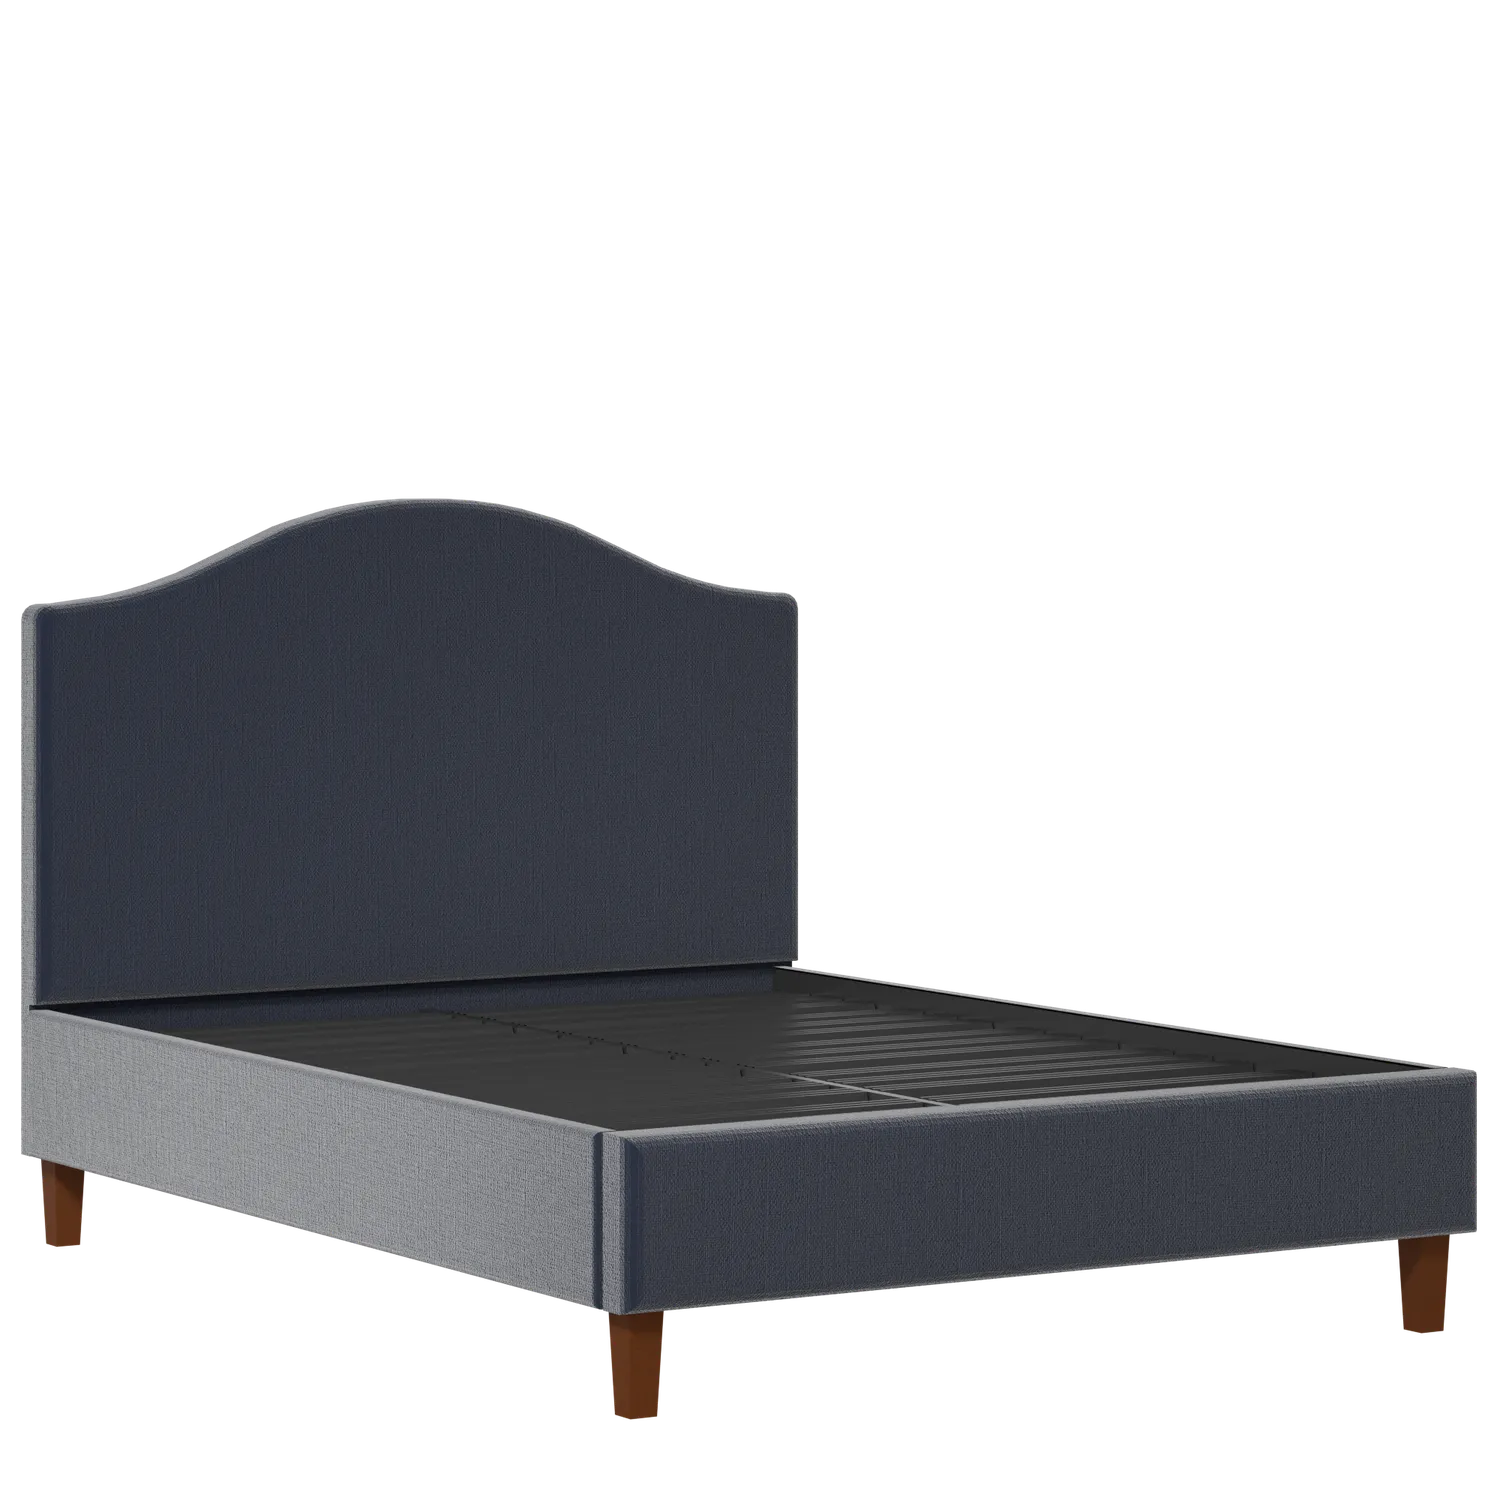 Burley Slim upholstered bed in oxford blue fabric